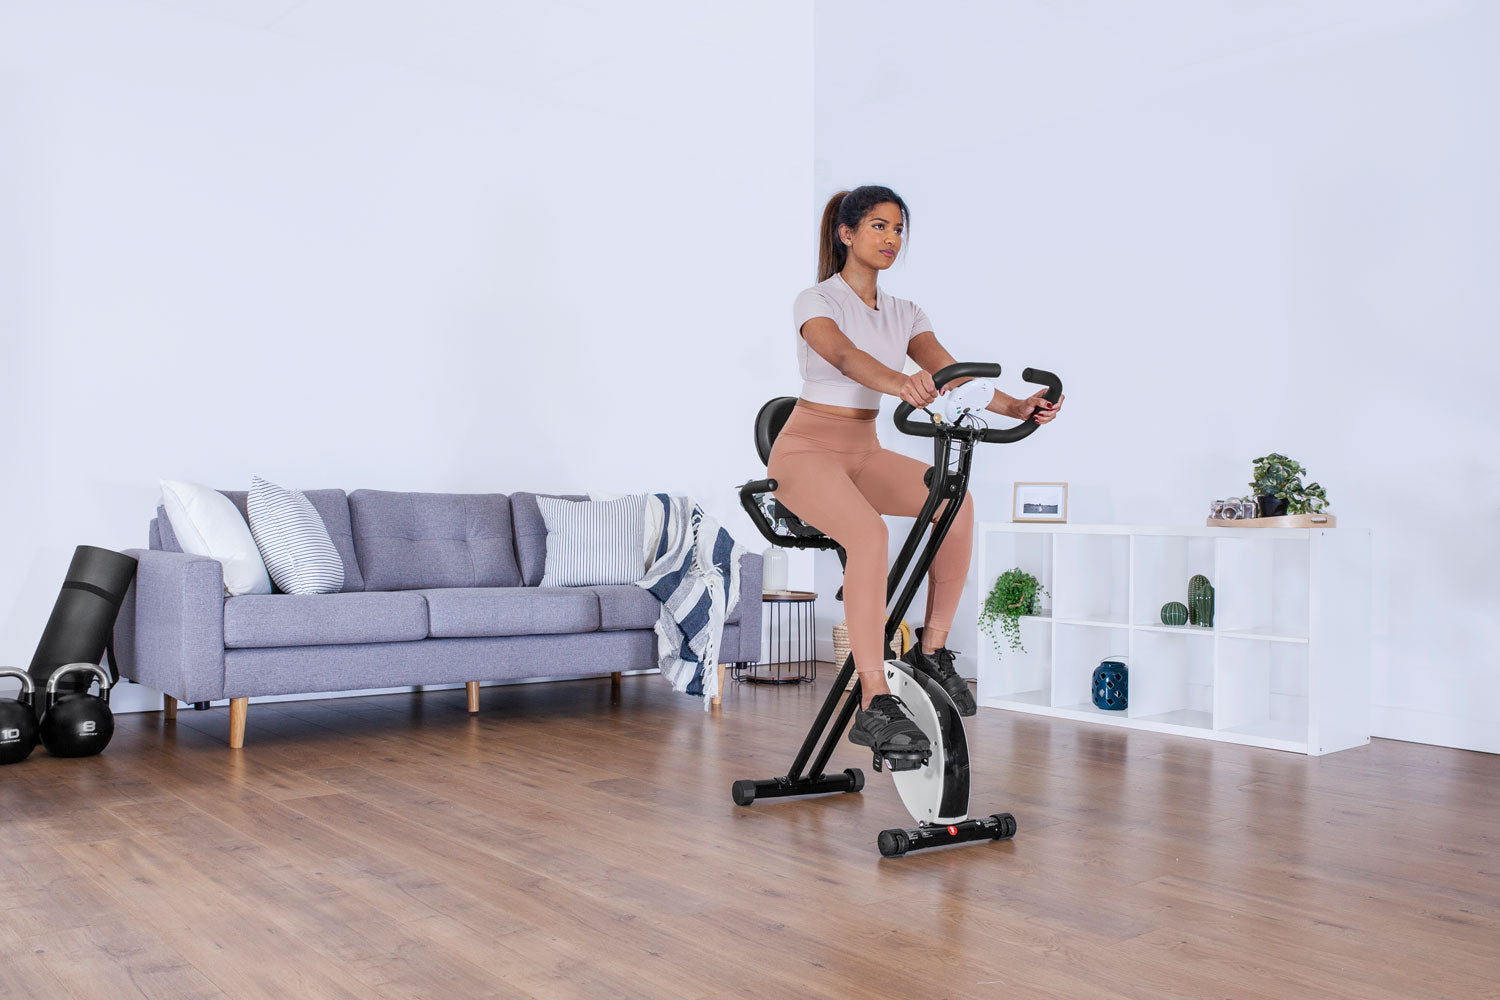 What Body Parts Does an Exercise Bike Work Out?